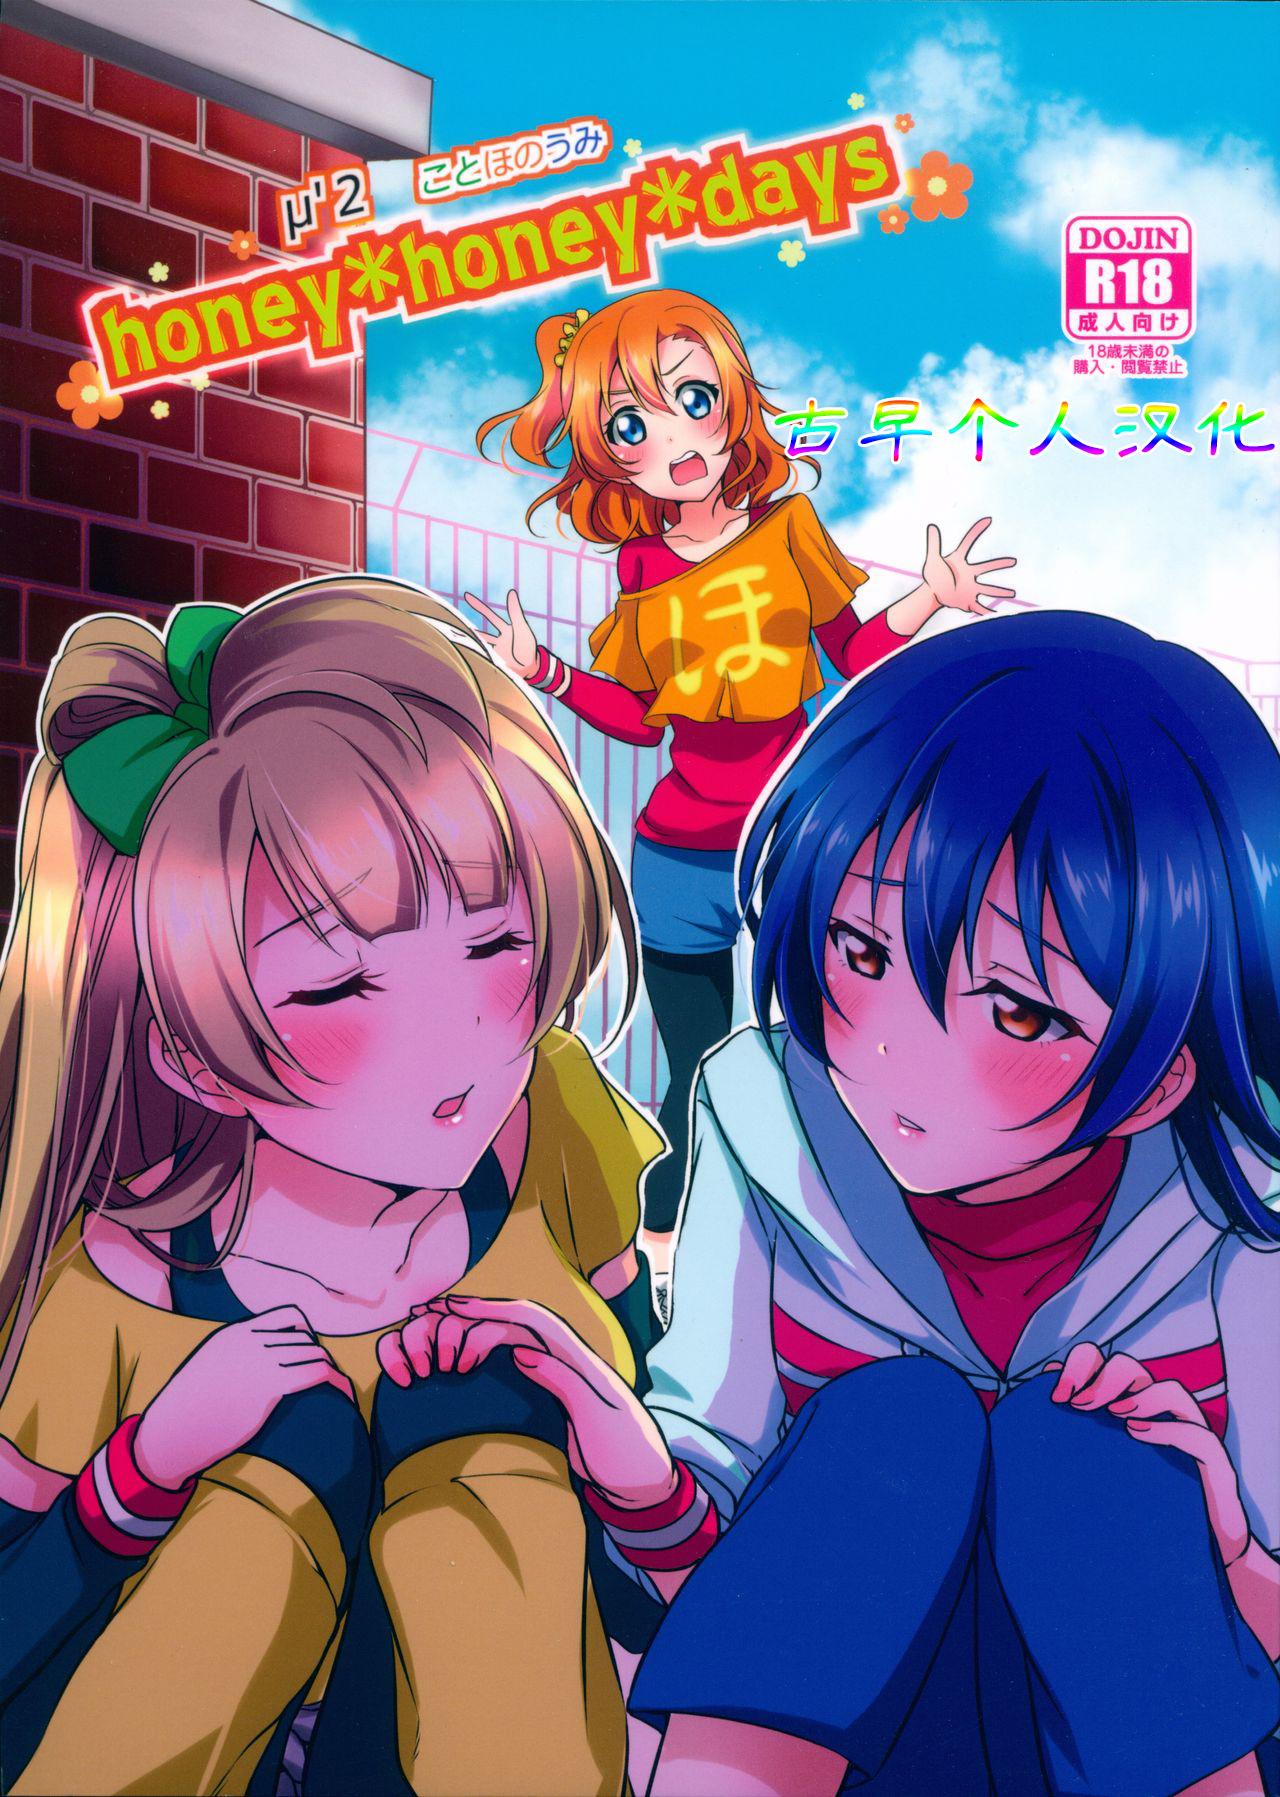 Young Tits honey*honey*days - Love live Chile - Page 1